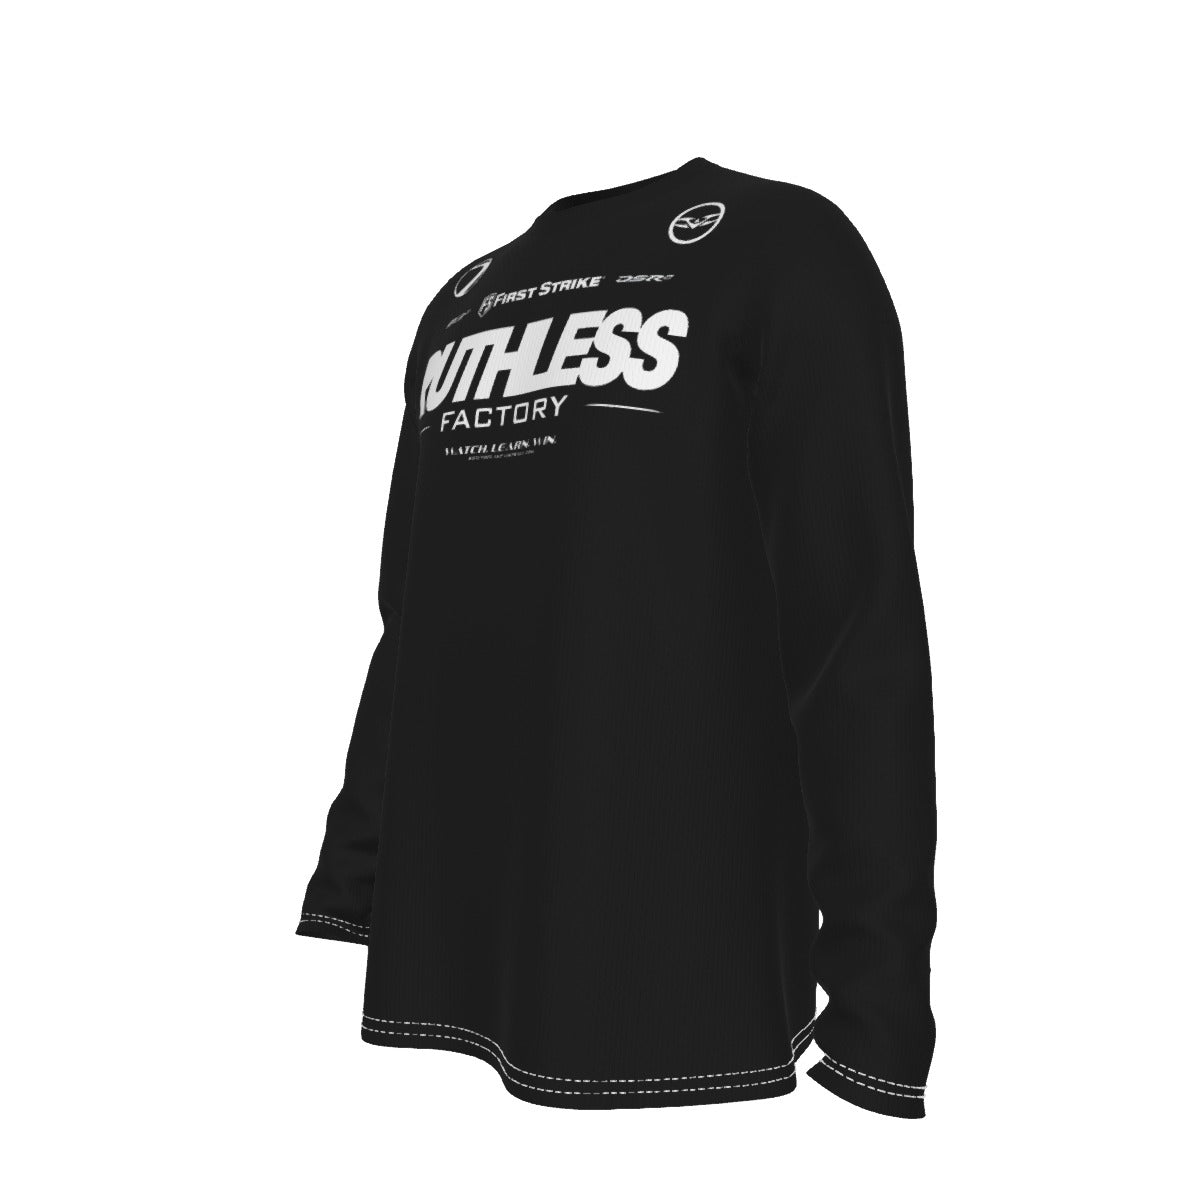 Ruthless Factory Long Sleeve